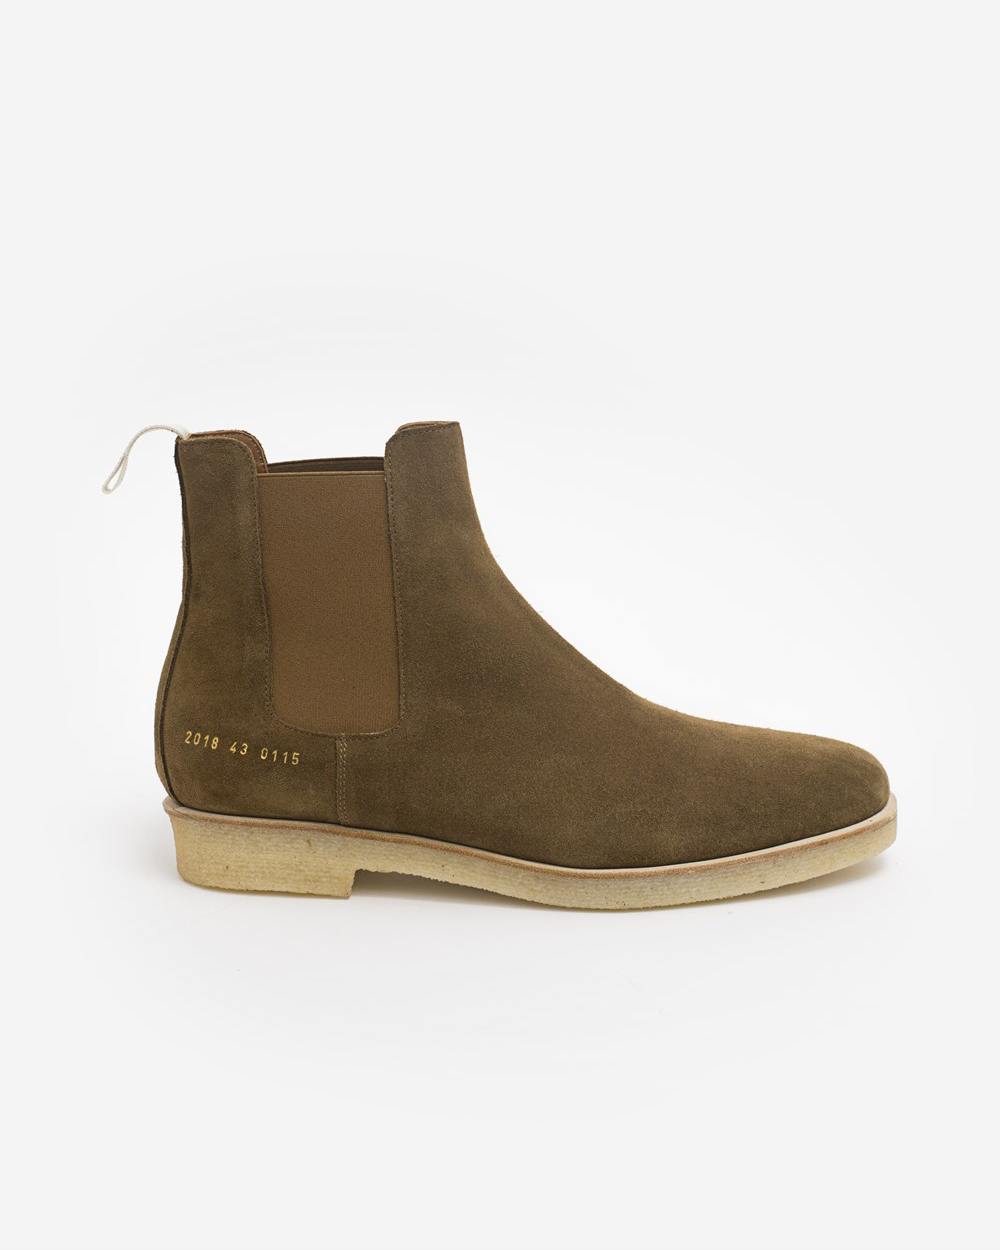 Common Projects chelsea boot suede, $869, from Workshop.